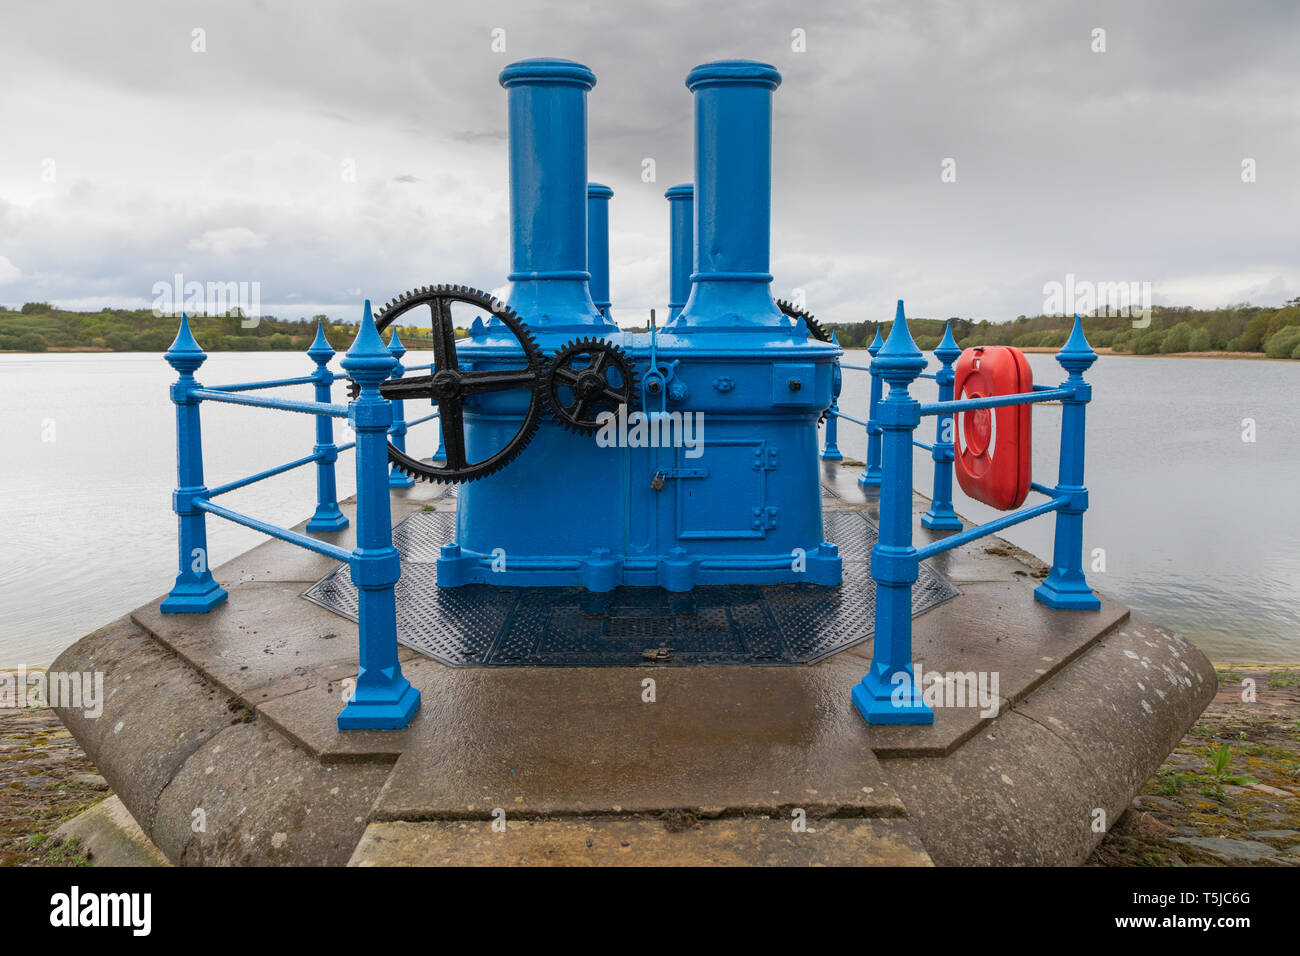 Ravensthorpe, Northamptonshire / UK - April 25th 2019: Blue valve gear housing with black gear wheels covered in rainwater droplets under a leaden sky. Stock Photo